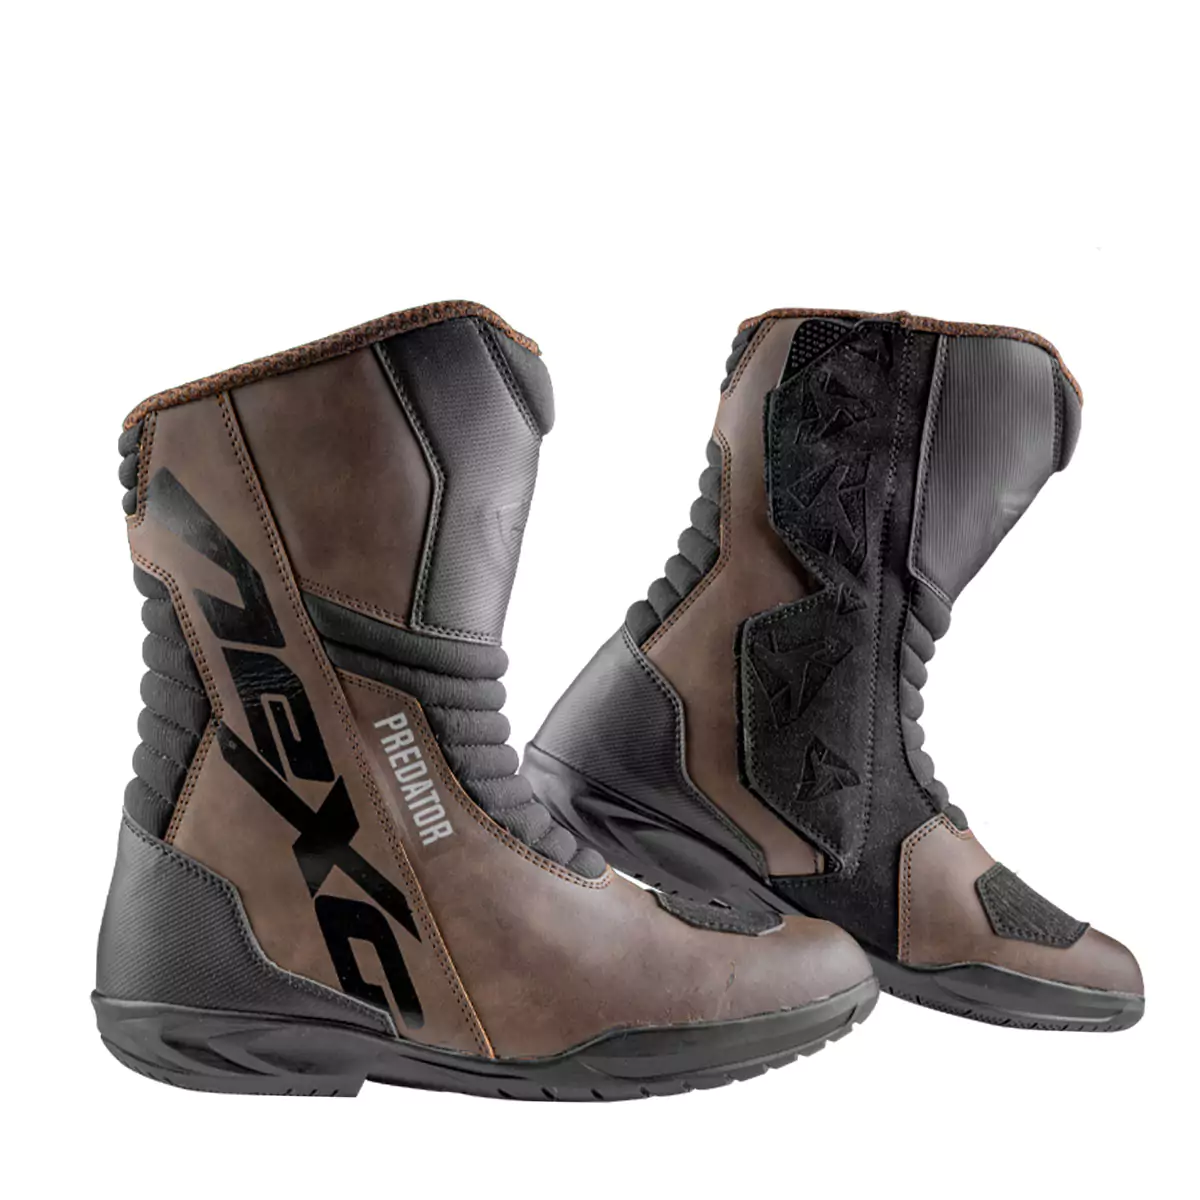 long brown and black colored touring boots pair without laces